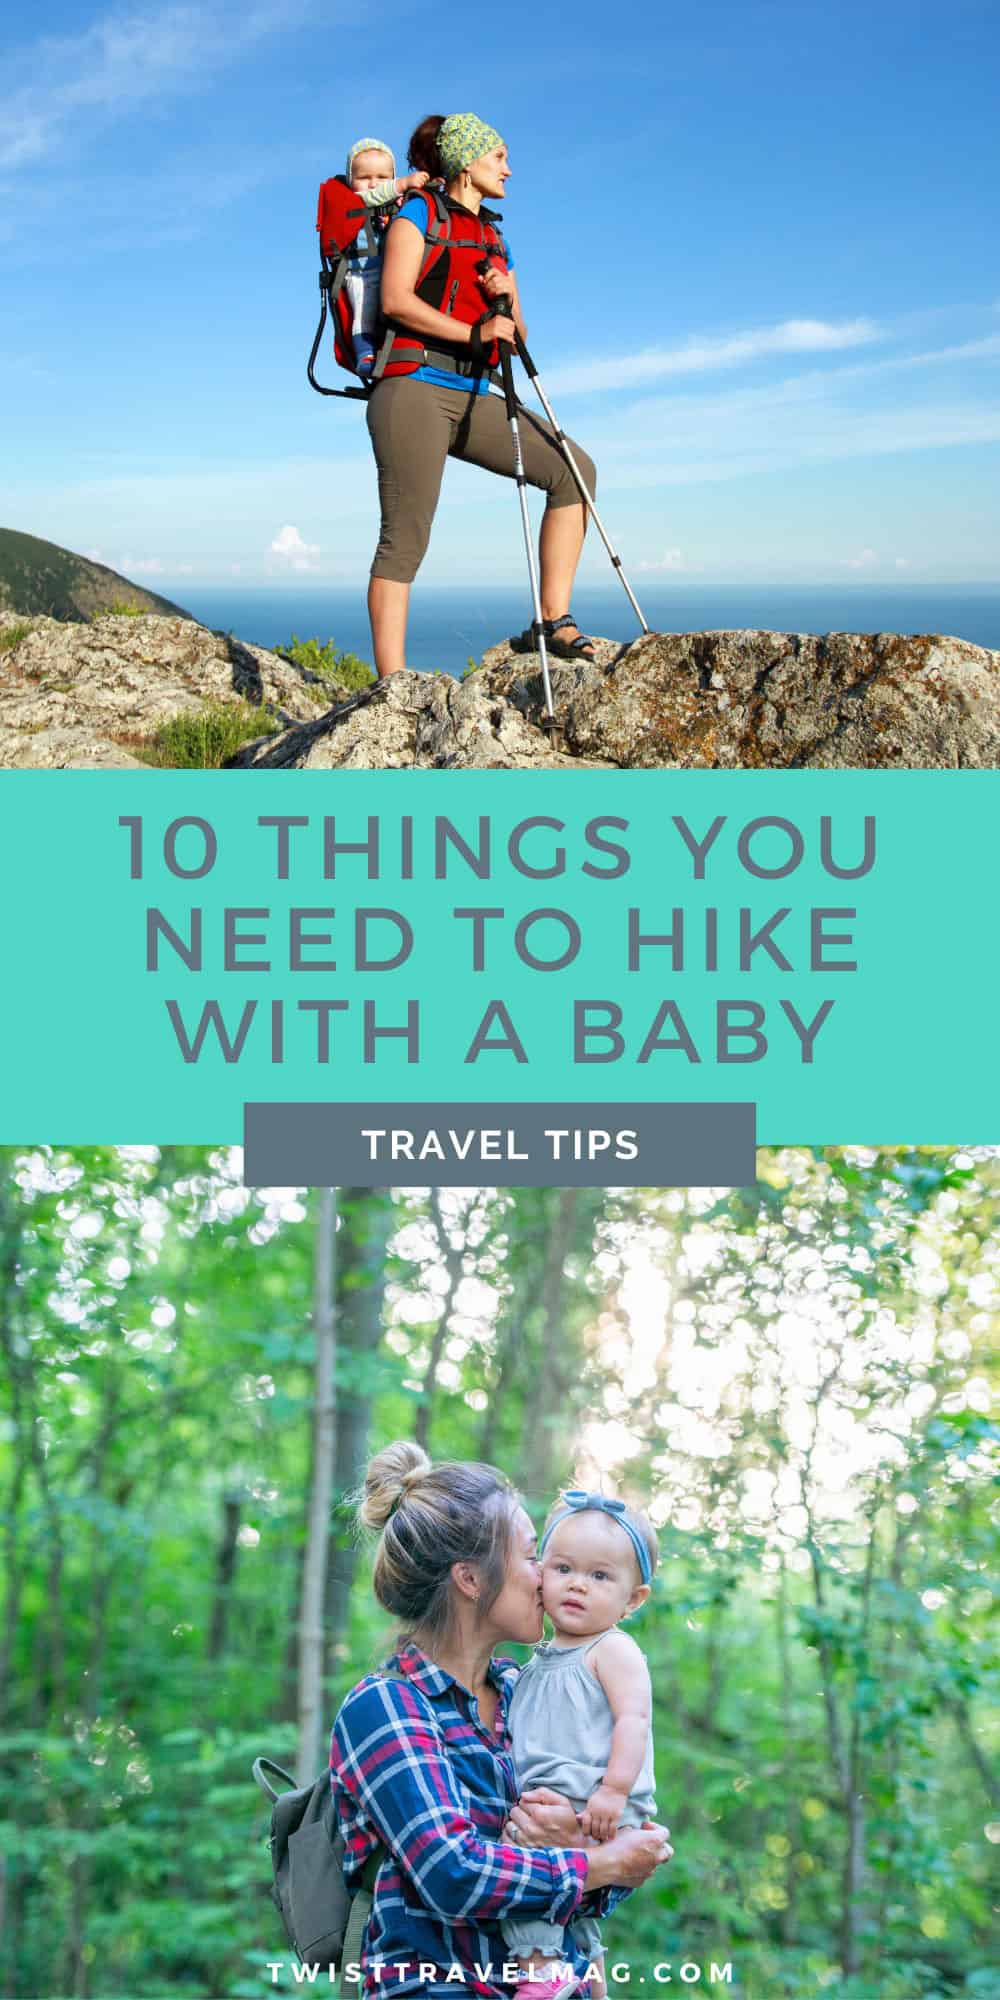 Best Tips for Hiking with a Baby